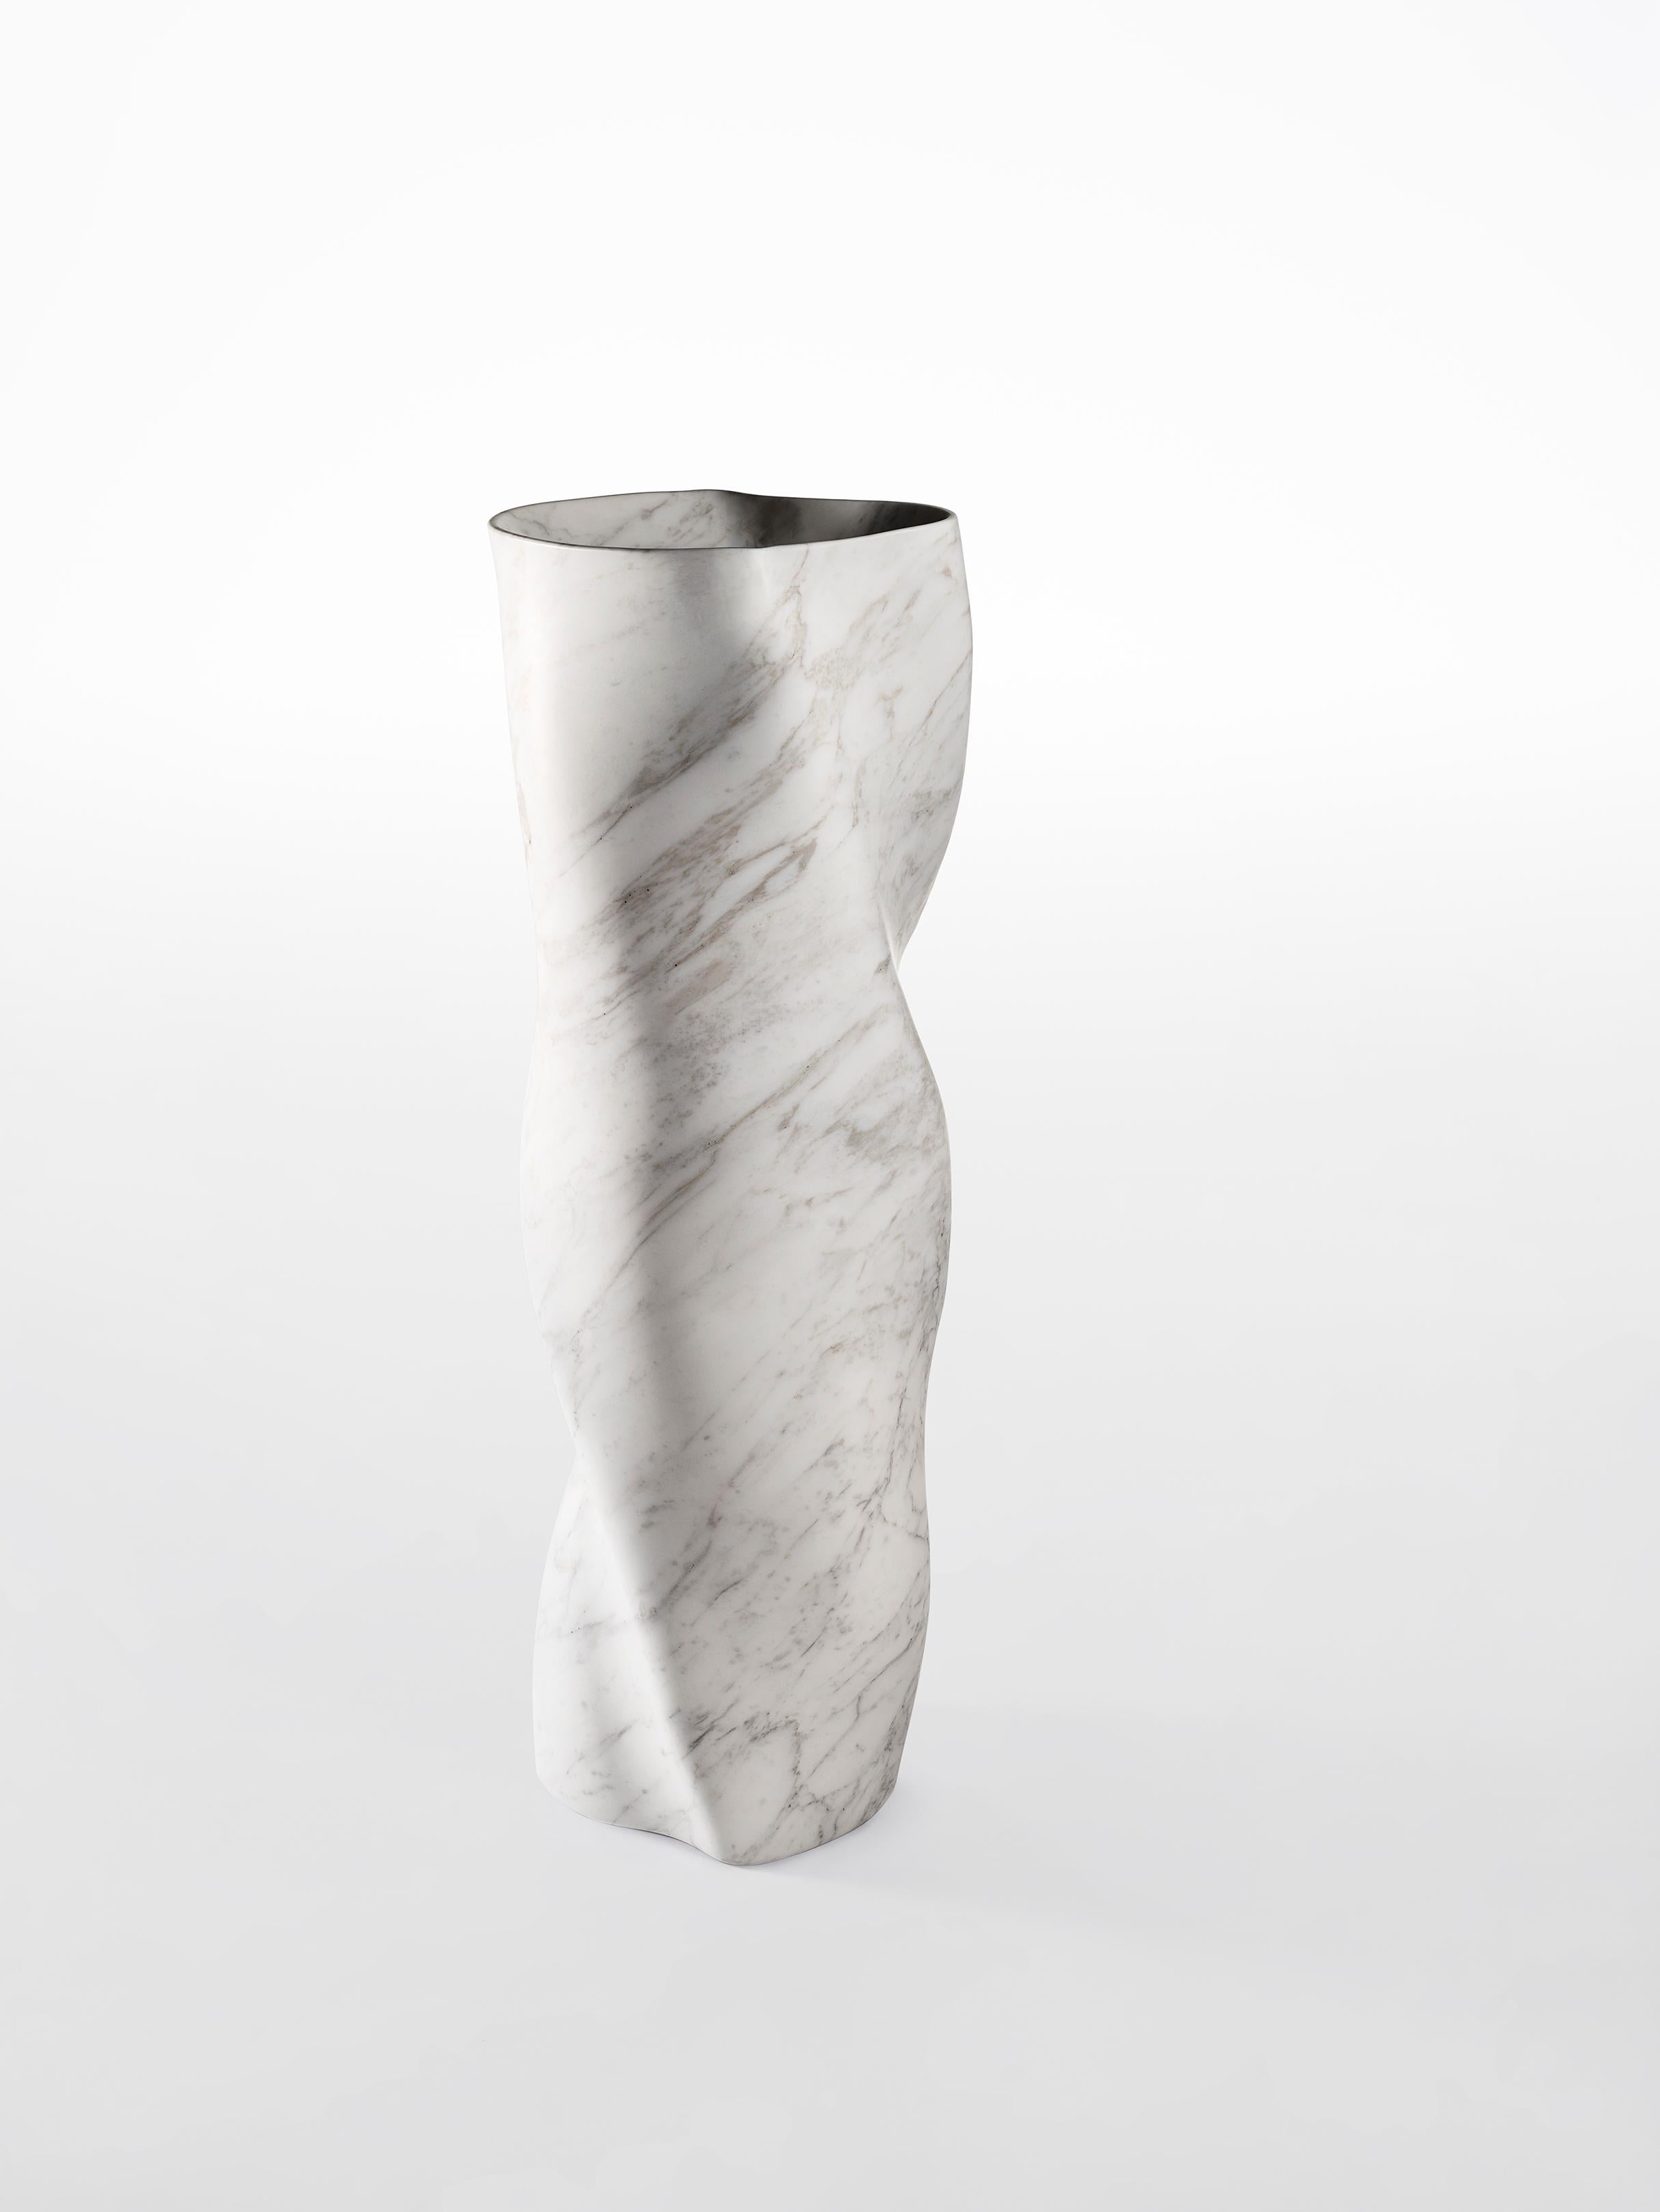 Vase II by Jonathan Hansen
12 EDITIONS + 1 AP
Dimensions: 35 x 37 x H 102 cm
Materials: Calacatta Marble


SERIES I CAPTUM BIOMORFE is a group of nine sculpture works created by New York artist Jonathan Hansen. Captum is a seized or captured